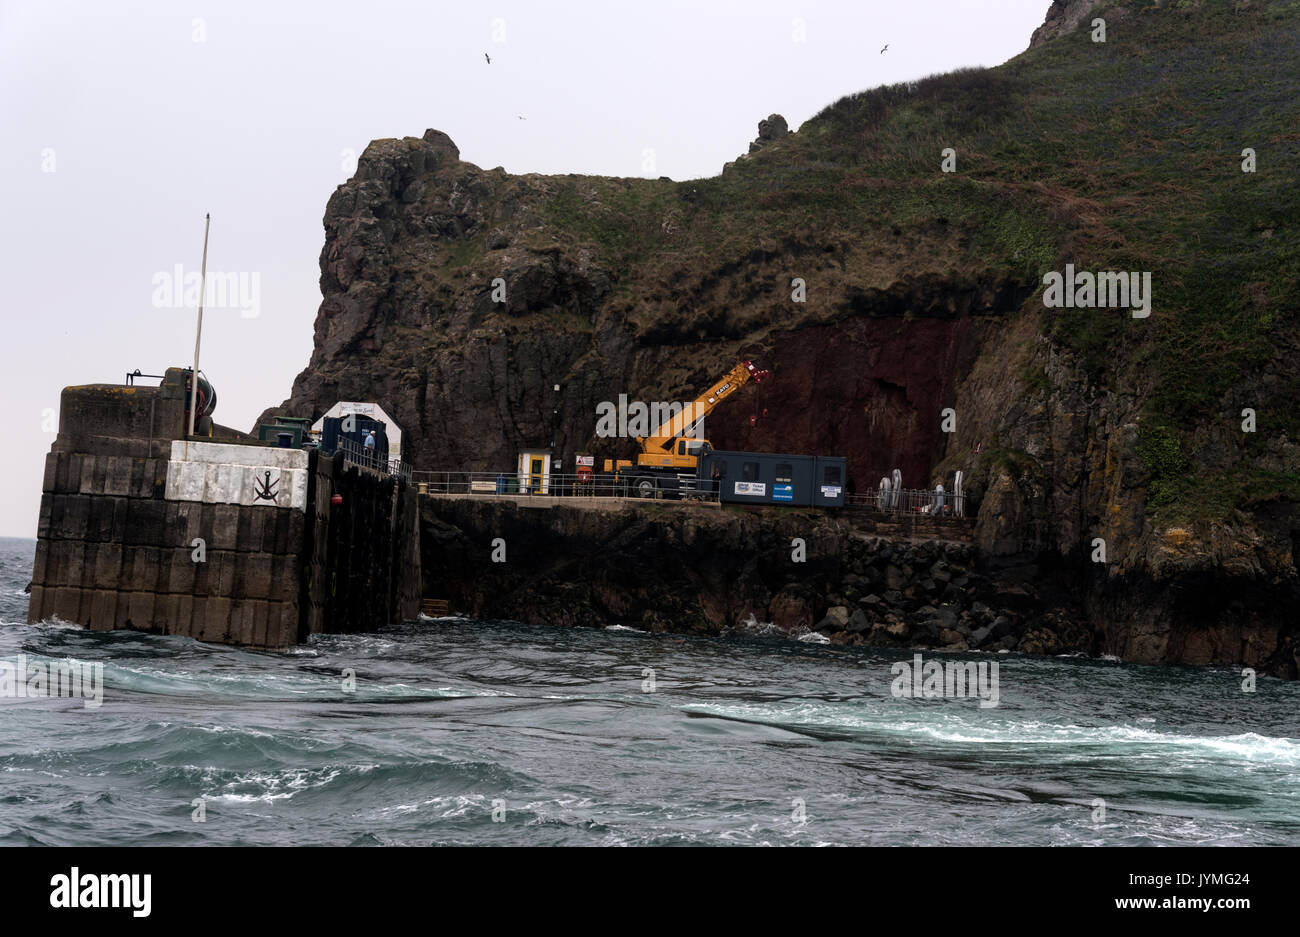 Sark harbour on the Isle of Sark, Bailiwick of Guernsey in the Channel Islands, Britain Stock Photo